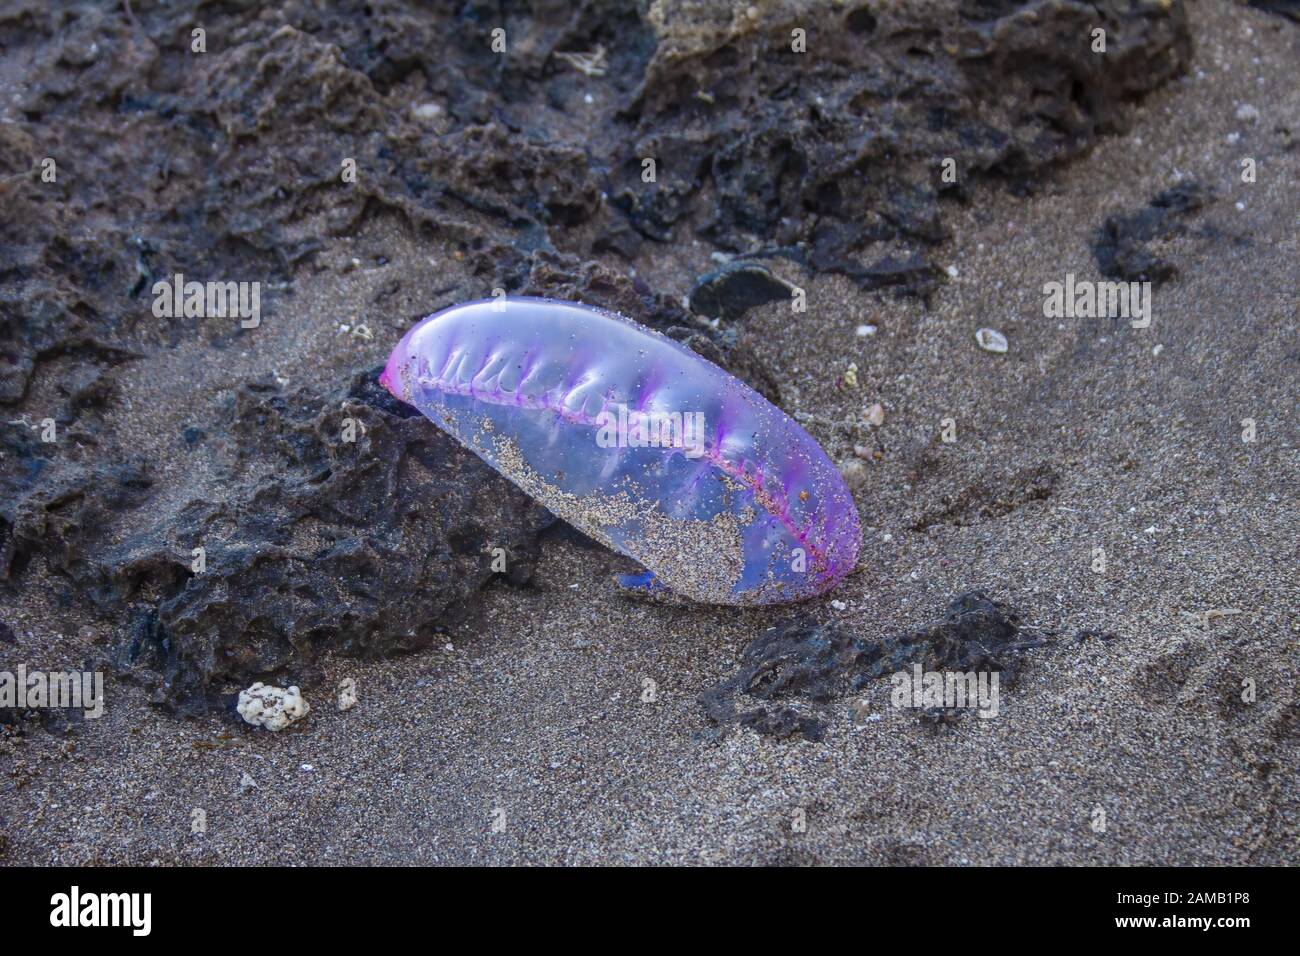 Portuguese Man of War washed up on Treasure Beach, Jamaica Stock Photo